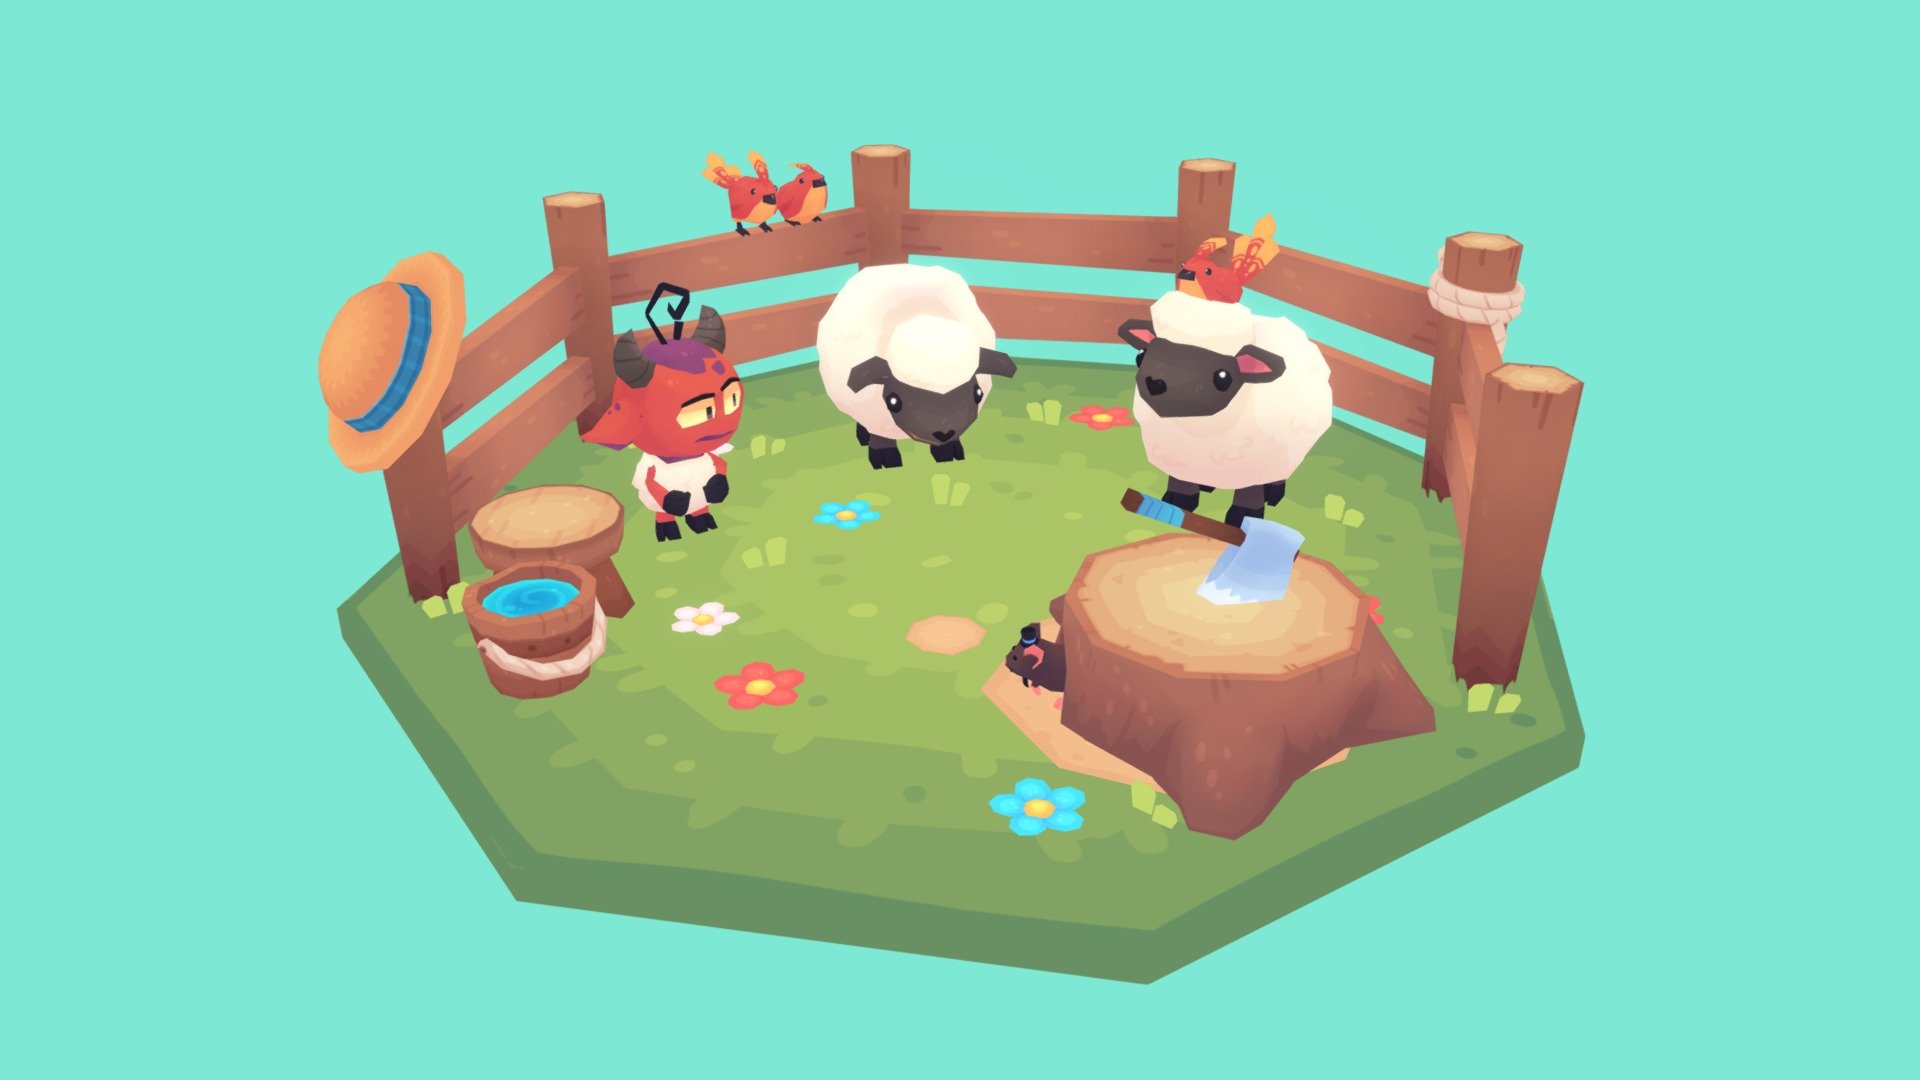 Just a little scene with some sheep, birds and a mouse! Nothing out of the ordinary here - Fellow Sheep - 3D model by Lollitree 3d model